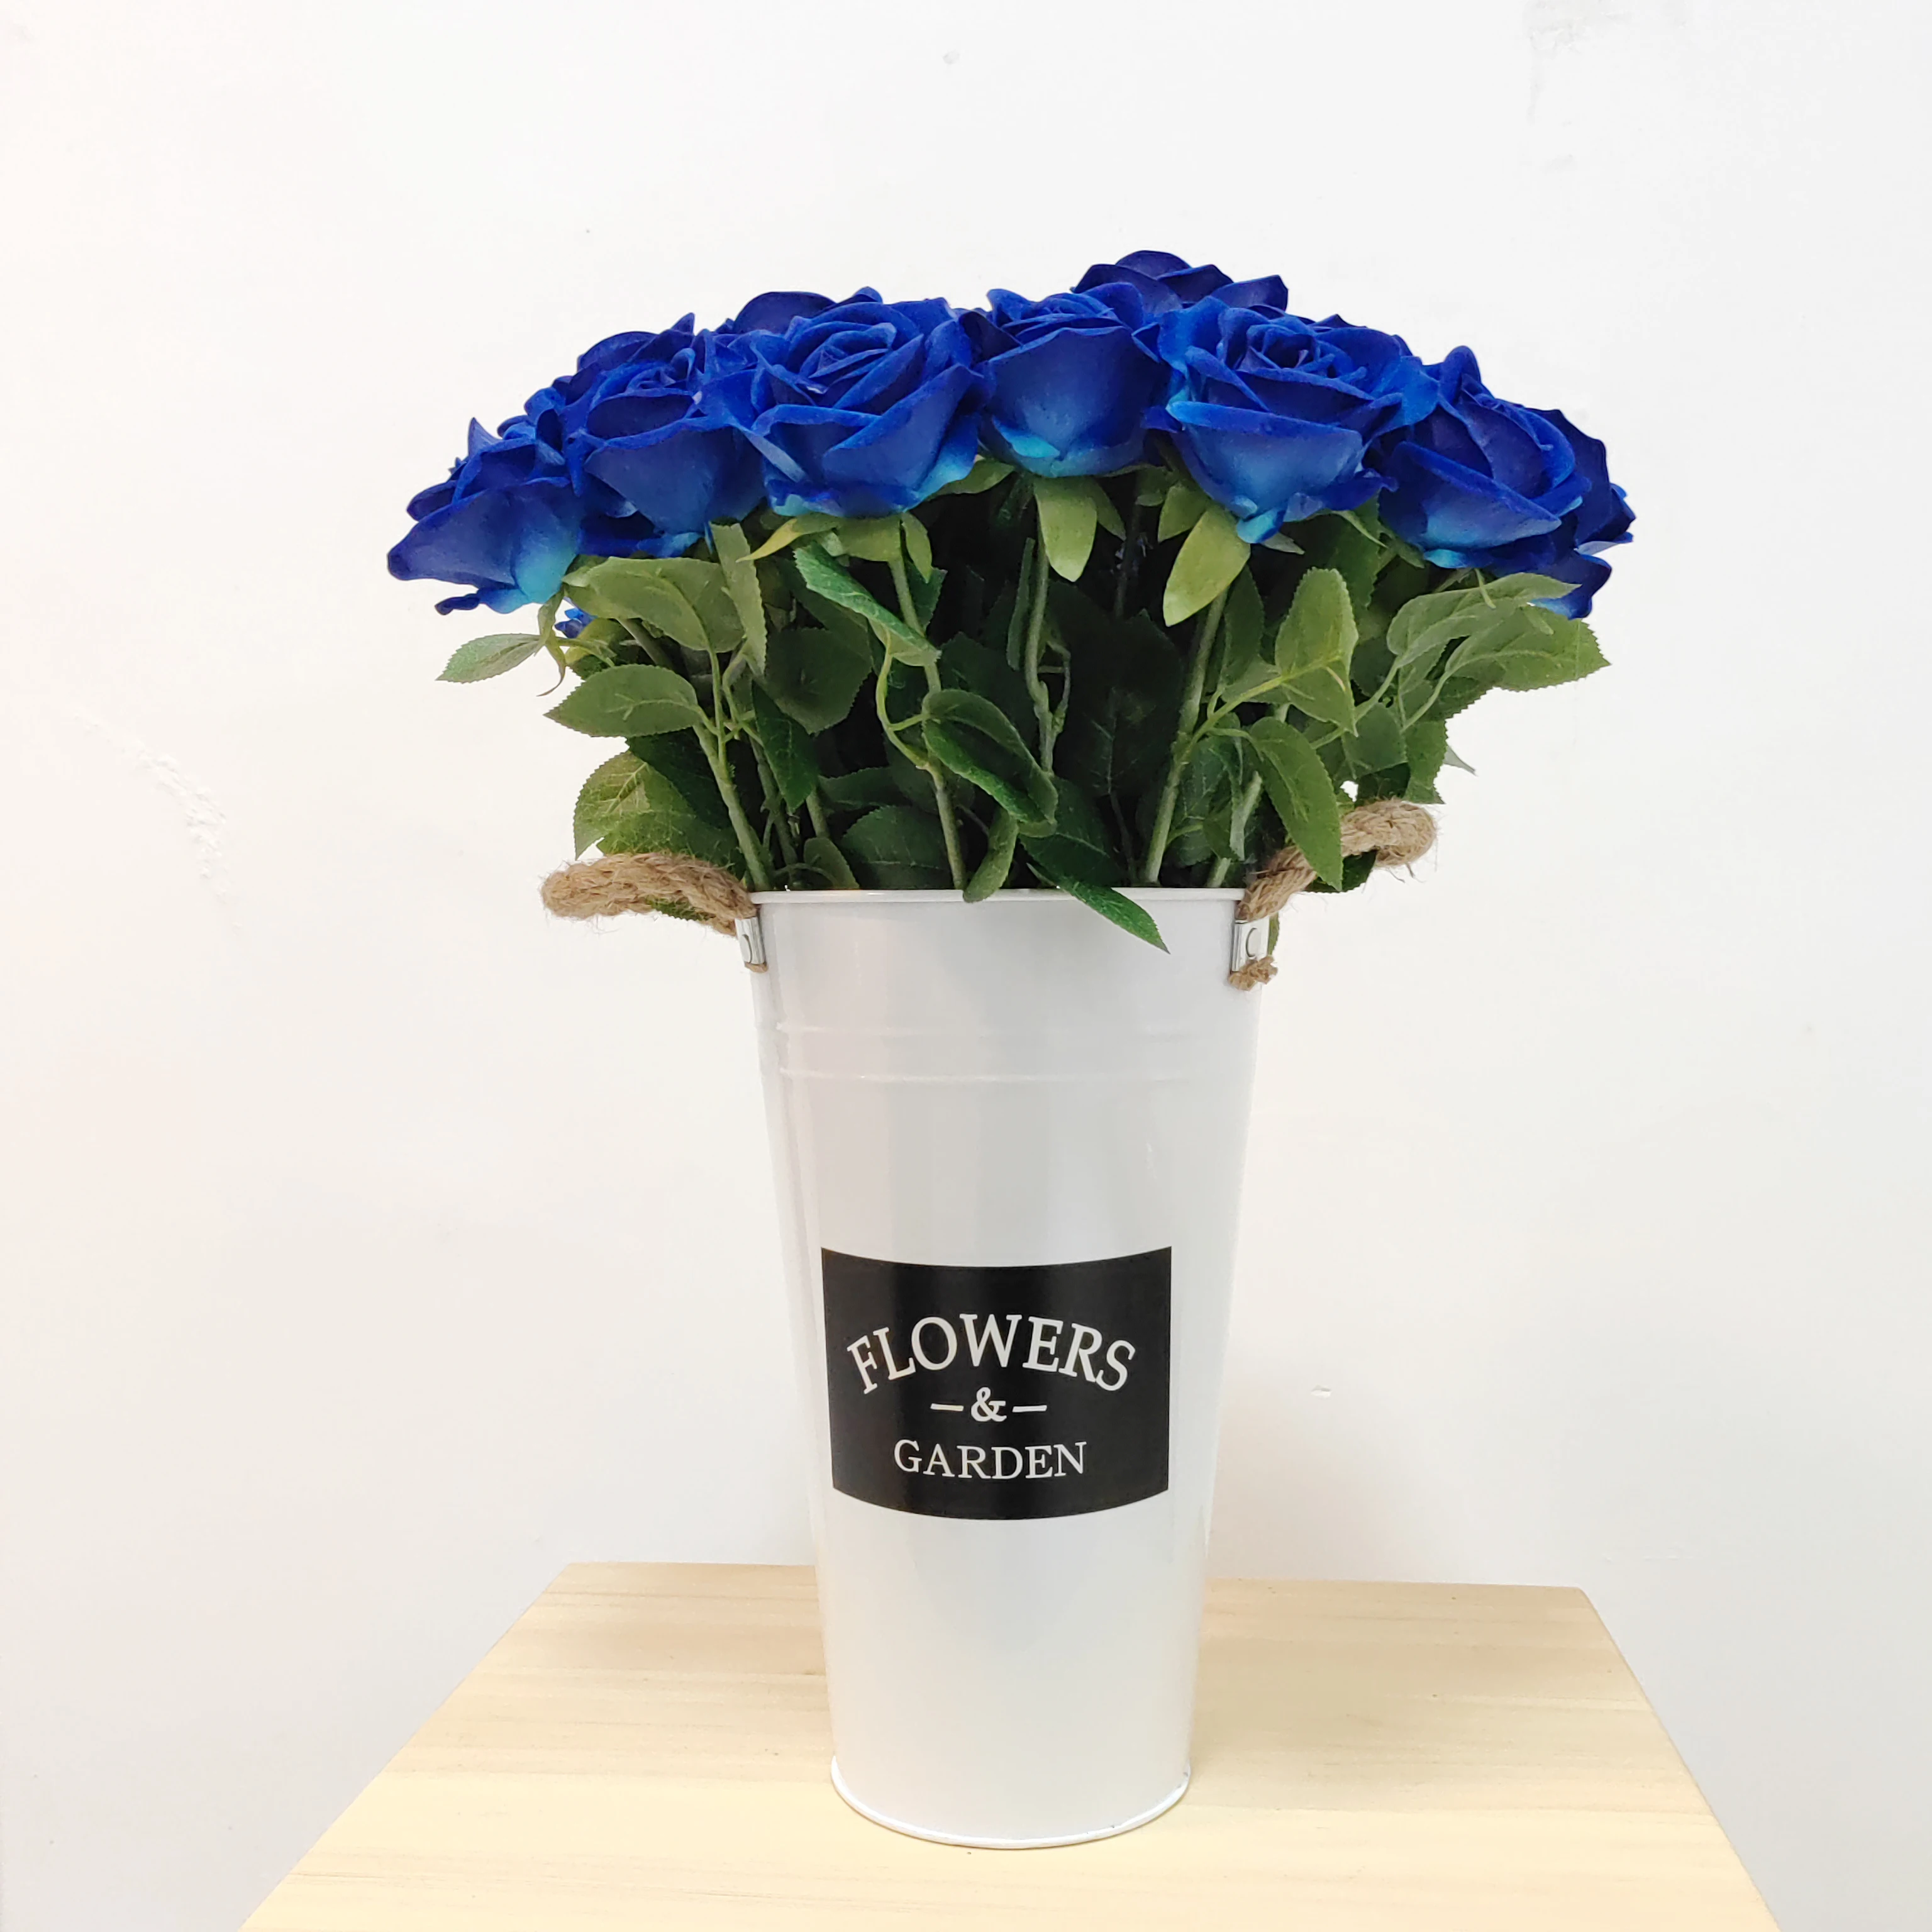 Factory Hot Sale Valentine's Day Gift Blue Roses Single Real Touch Silk Artificial Rose Decorative Flowers For Wedding